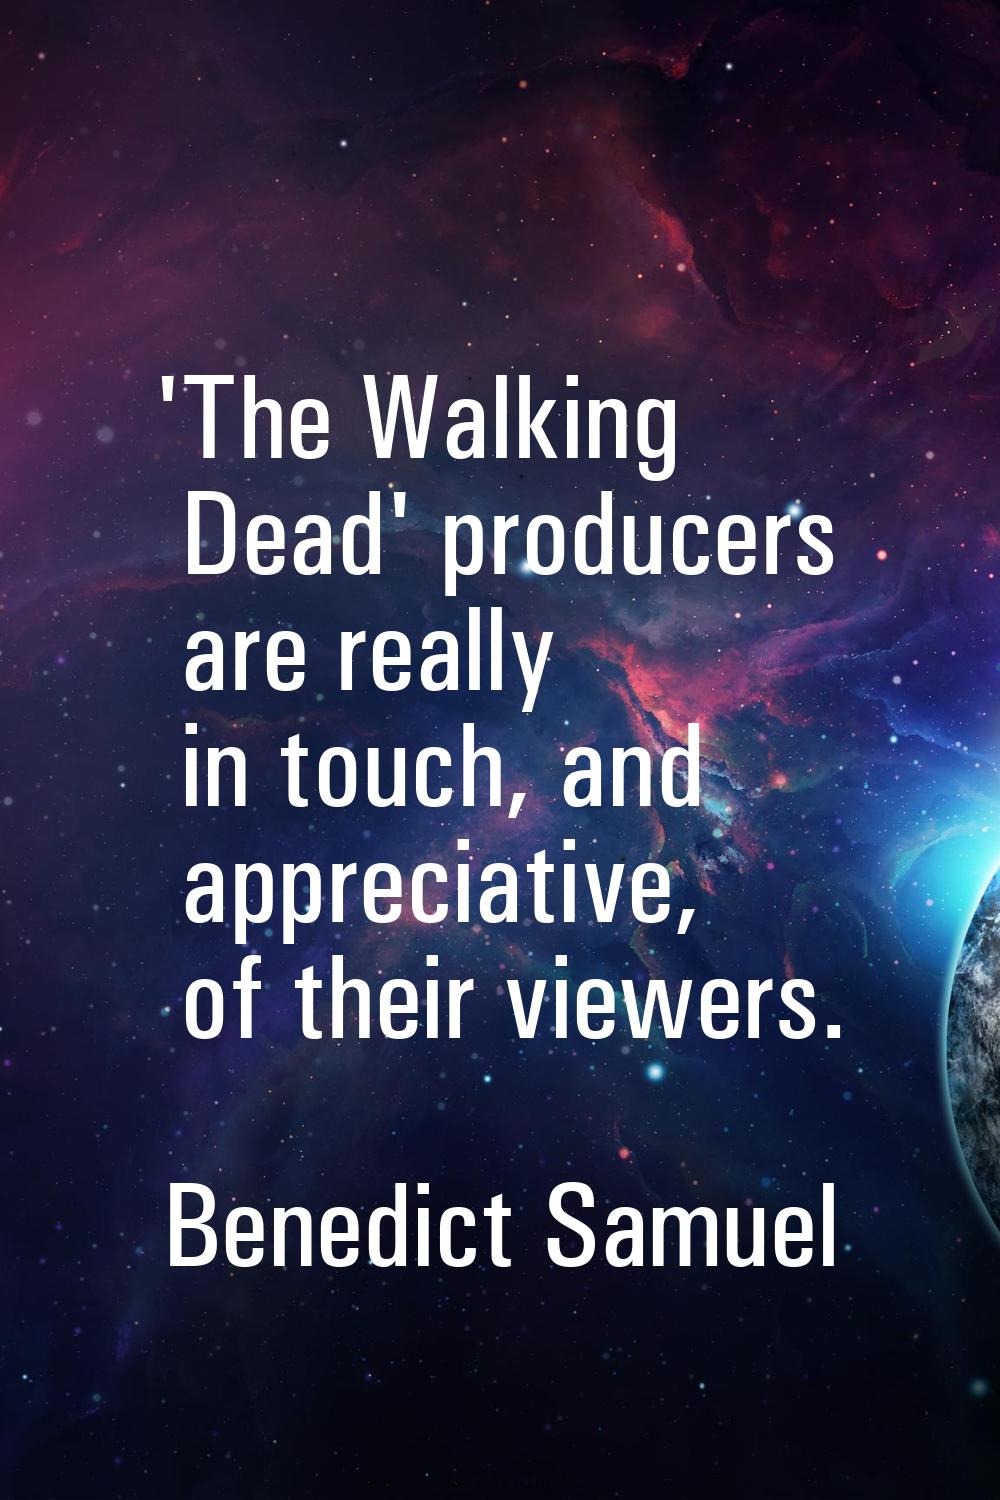 'The Walking Dead' producers are really in touch, and appreciative, of their viewers.